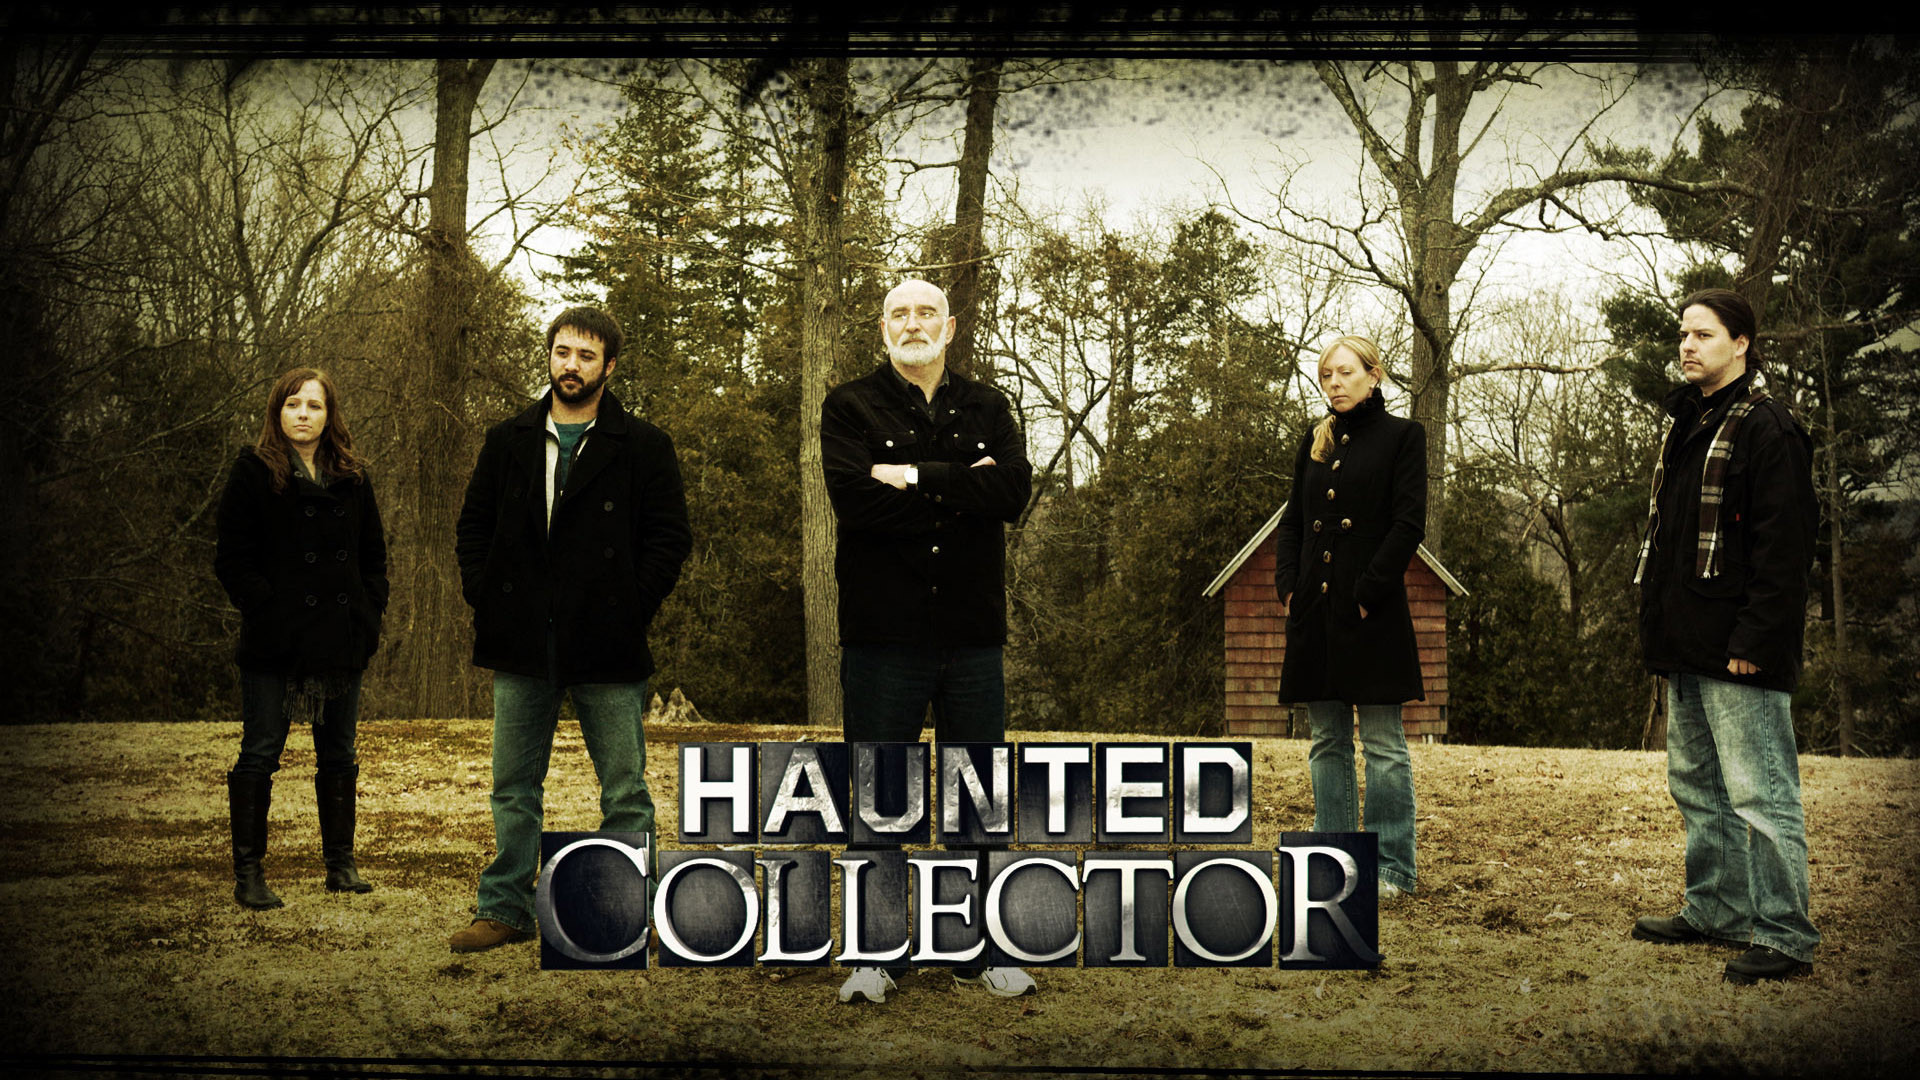 Show Haunted Collector